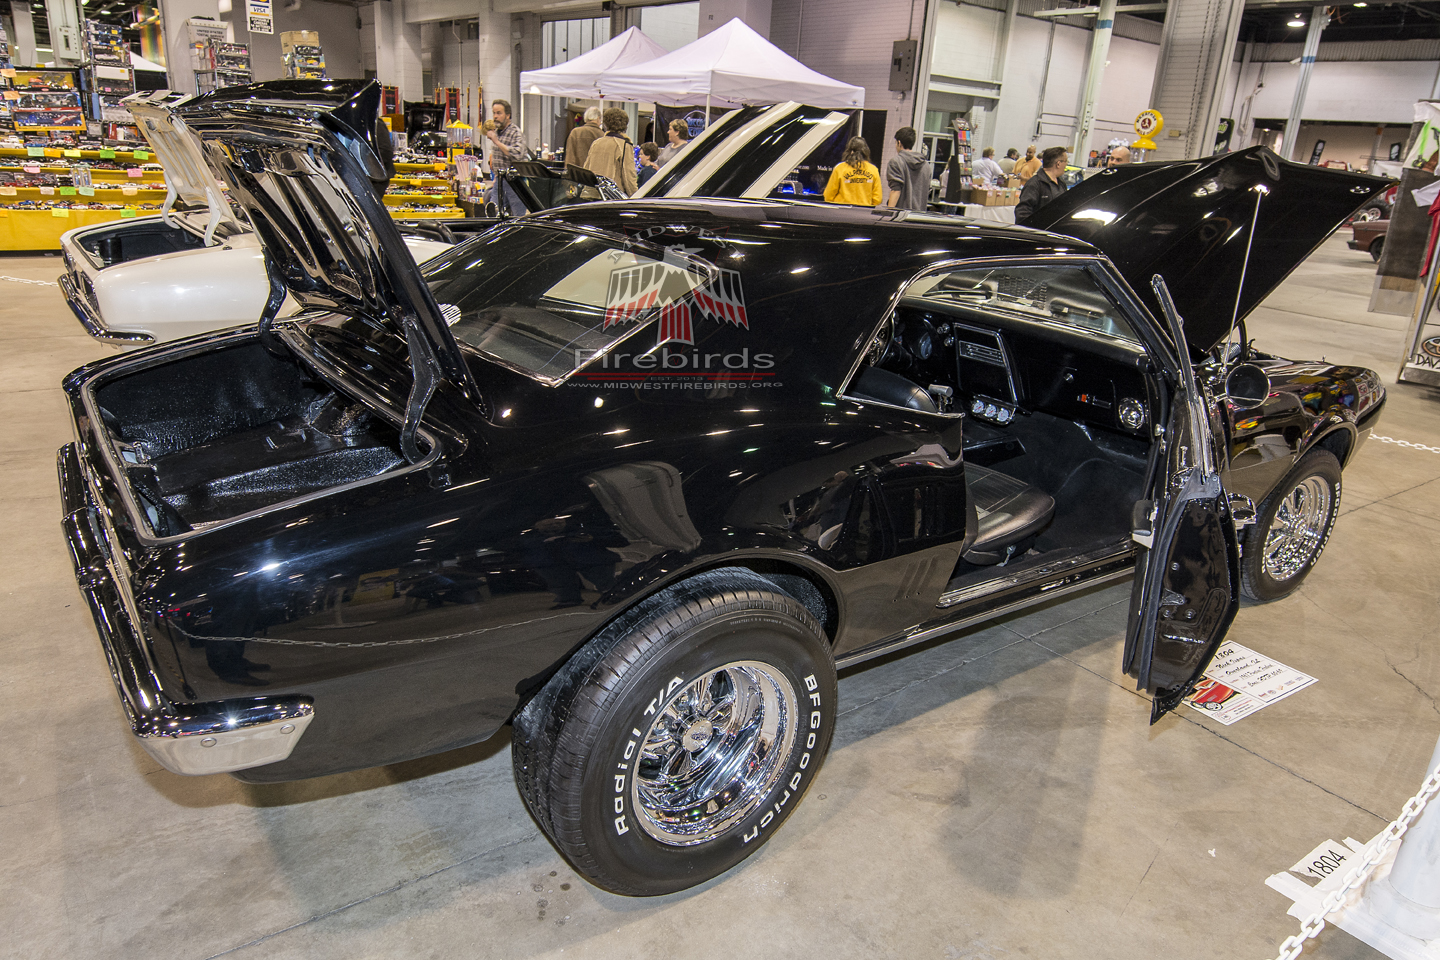 This black 1967 Pontiac Firebird coupe was on display at the 2014 World of Wheels Chicago car show.